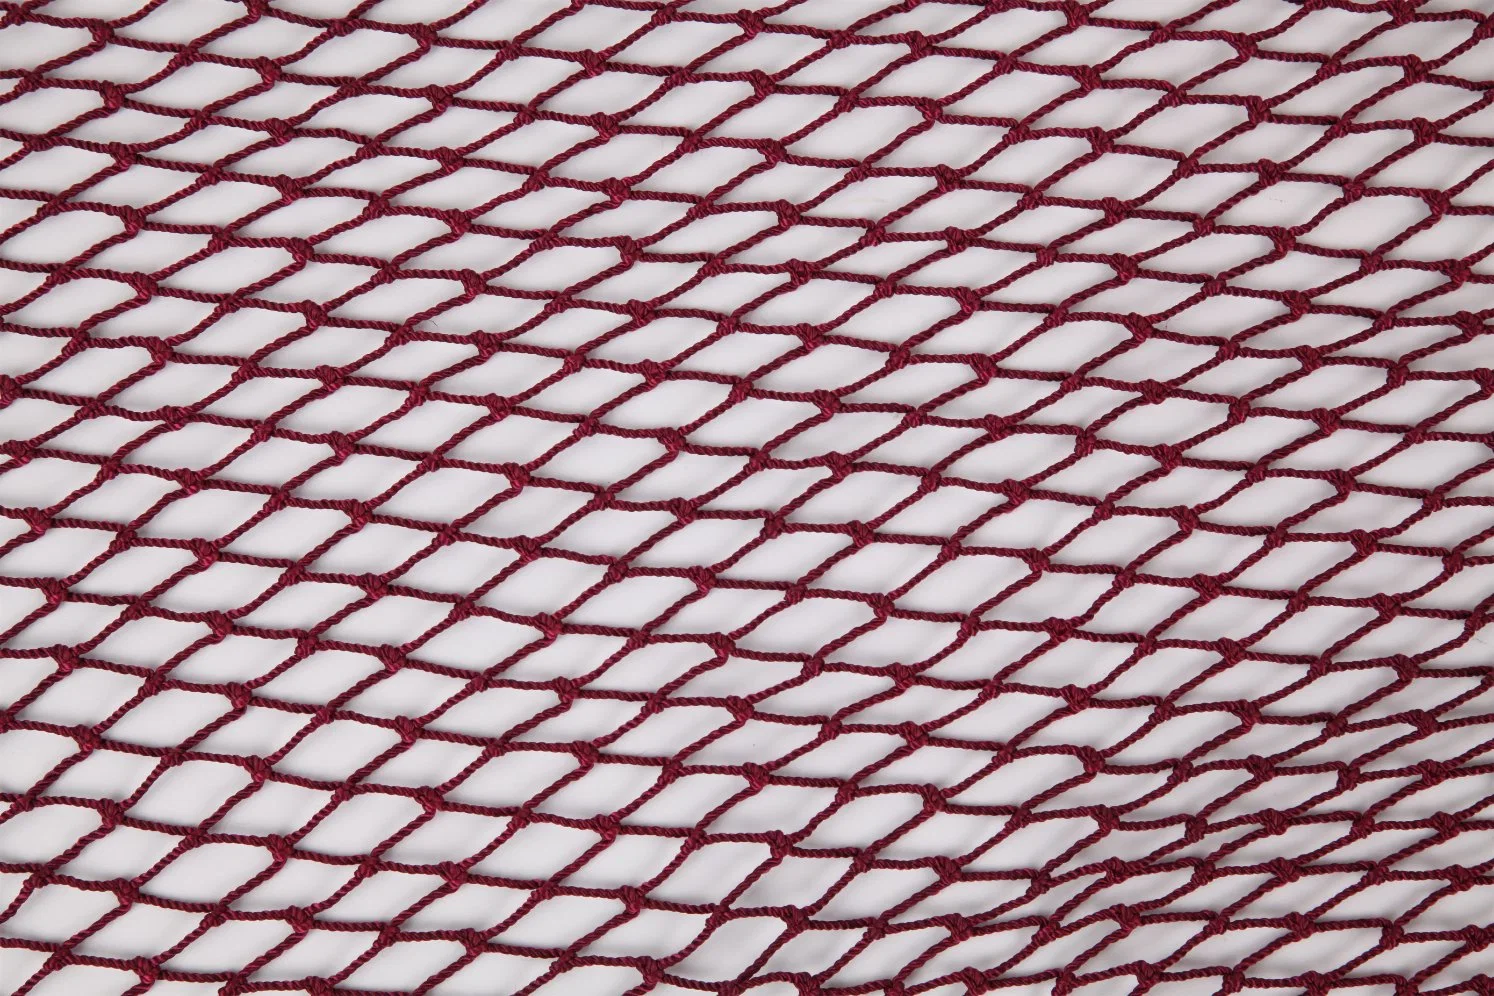 Agriculture Nets Top Quality Nylon Polyester Net Cast on Sale 100% PA Multifilament Fishing Net